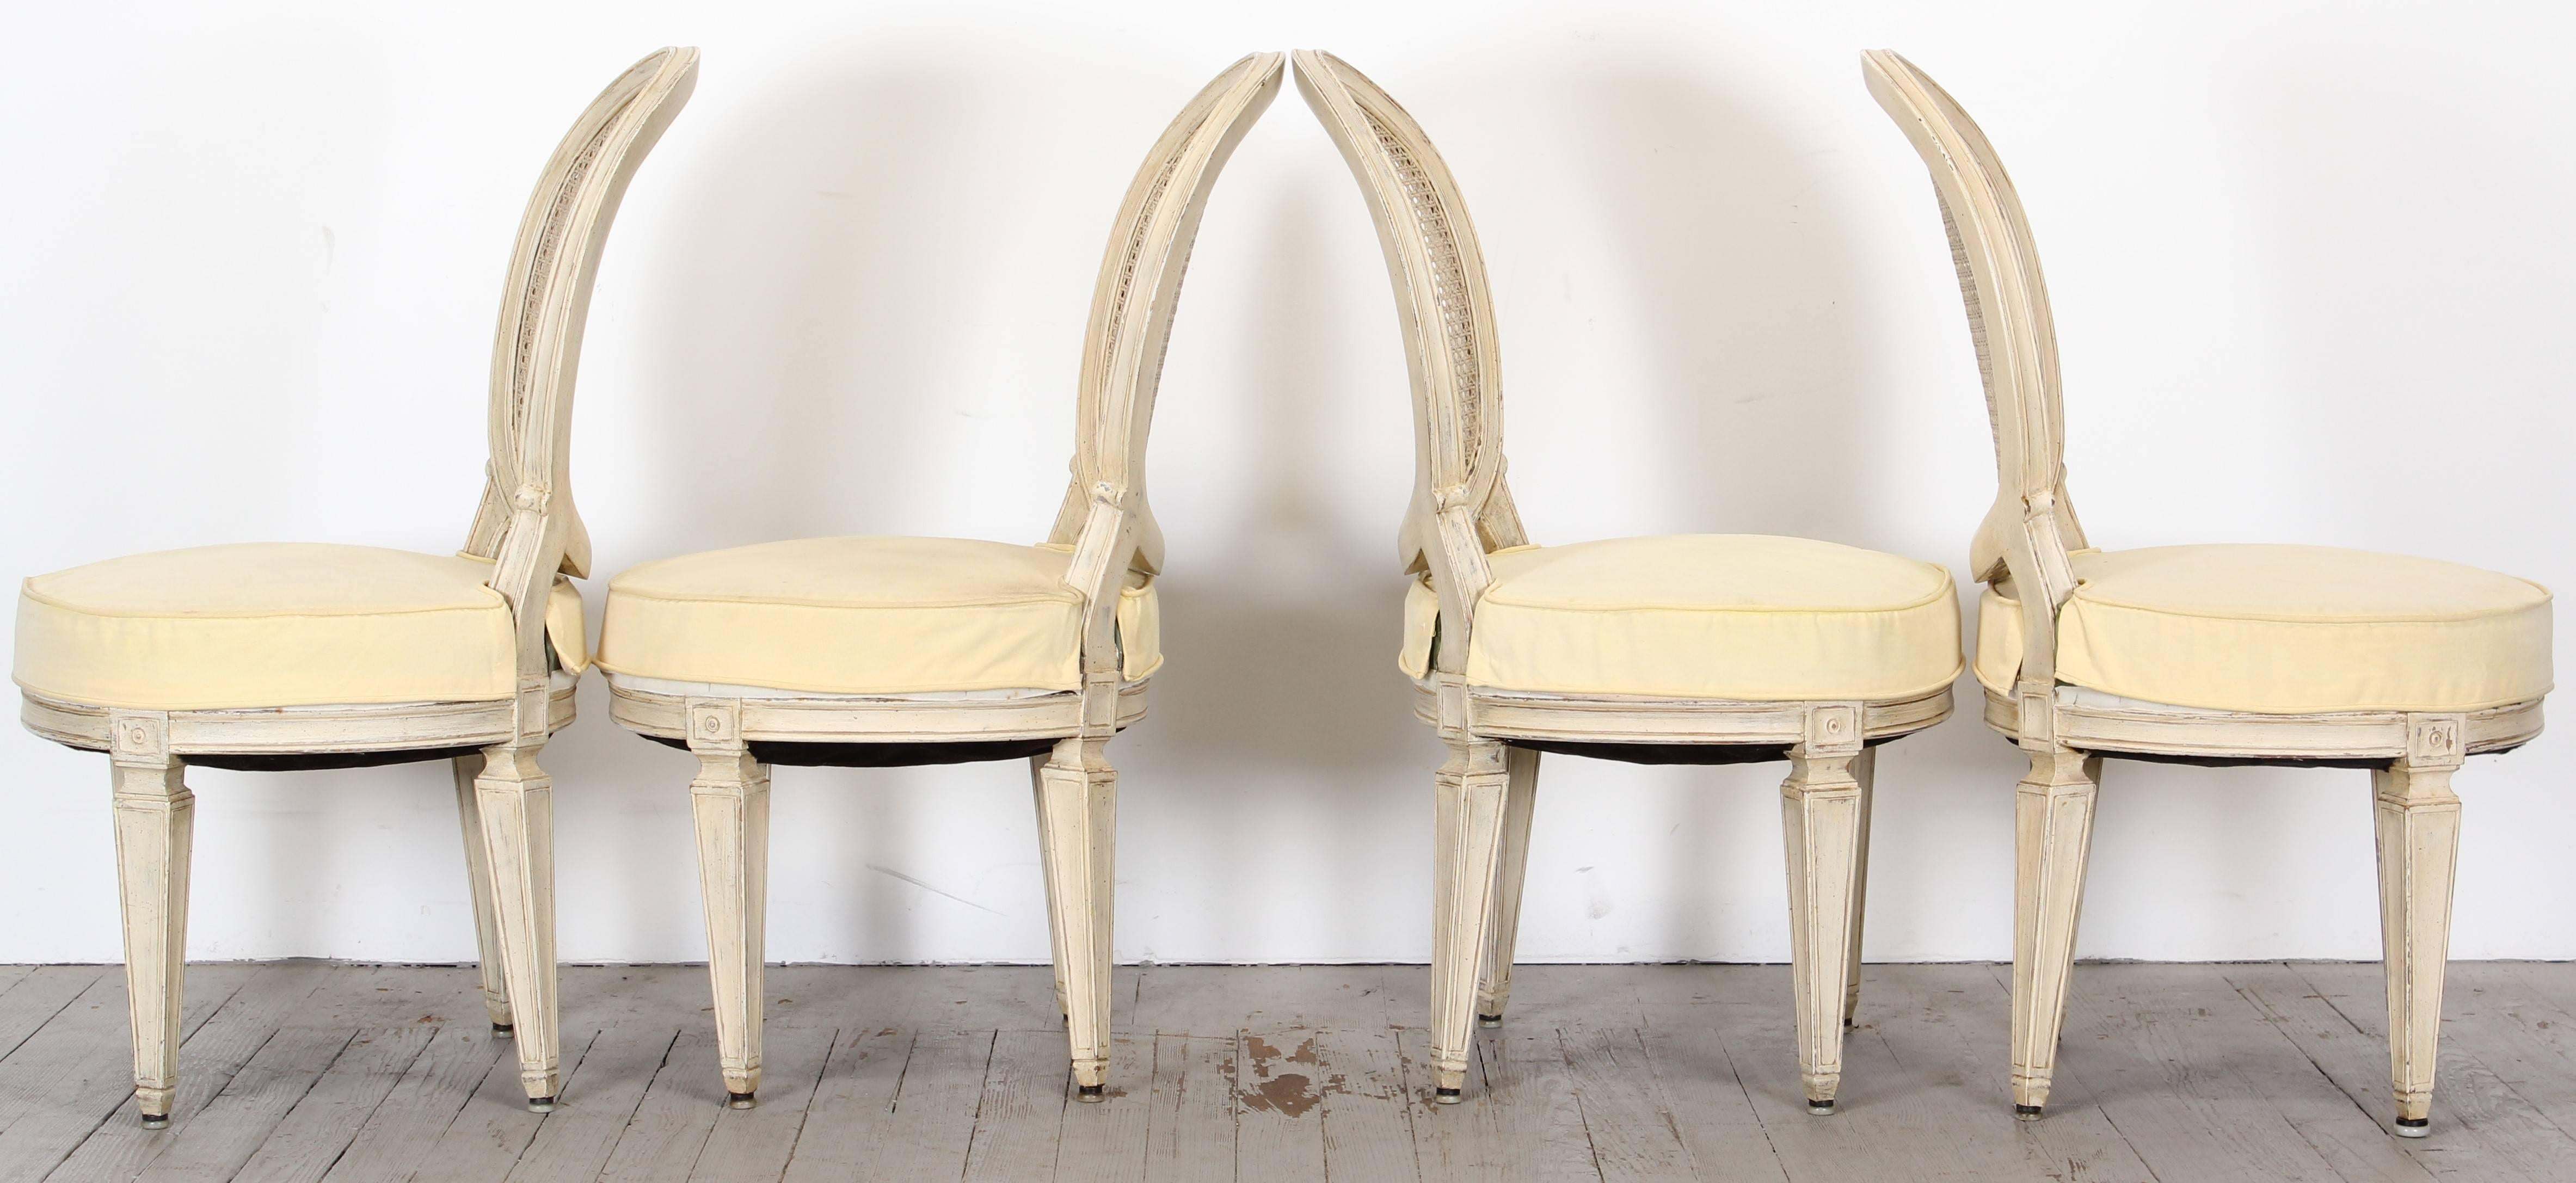 A fabulous large-scale dining set of four Louis XVI style painted chairs in the manner of Jansen. The coil spring seats are very wide and comfortable to sit in as far as French side chairs are concerned. Great painted matte white finished chairs